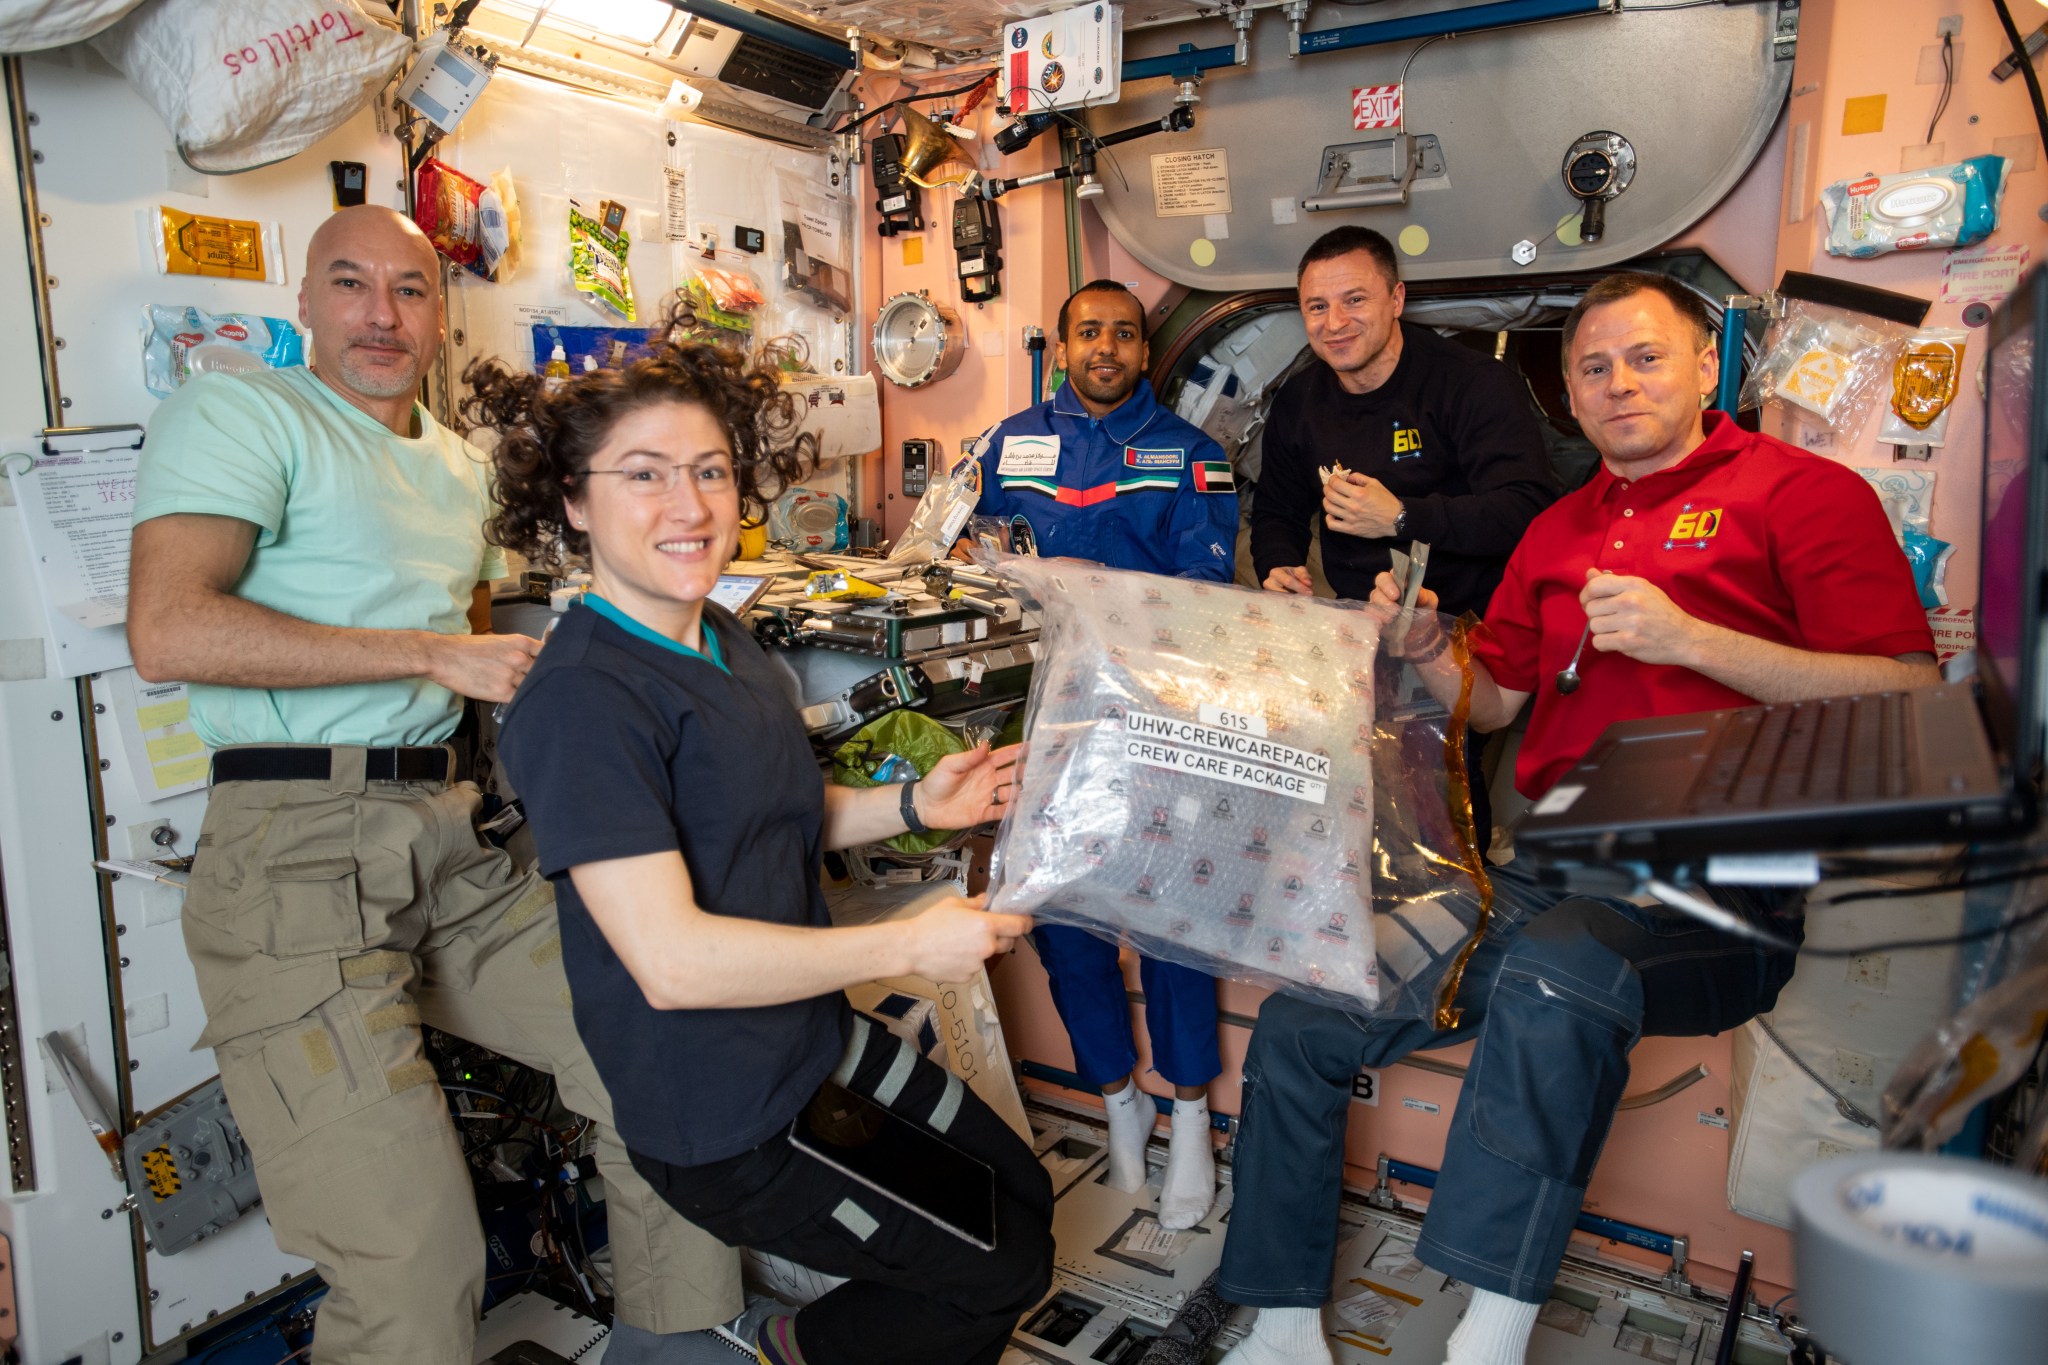 Astronauts aboard the ISS open a crew care package.